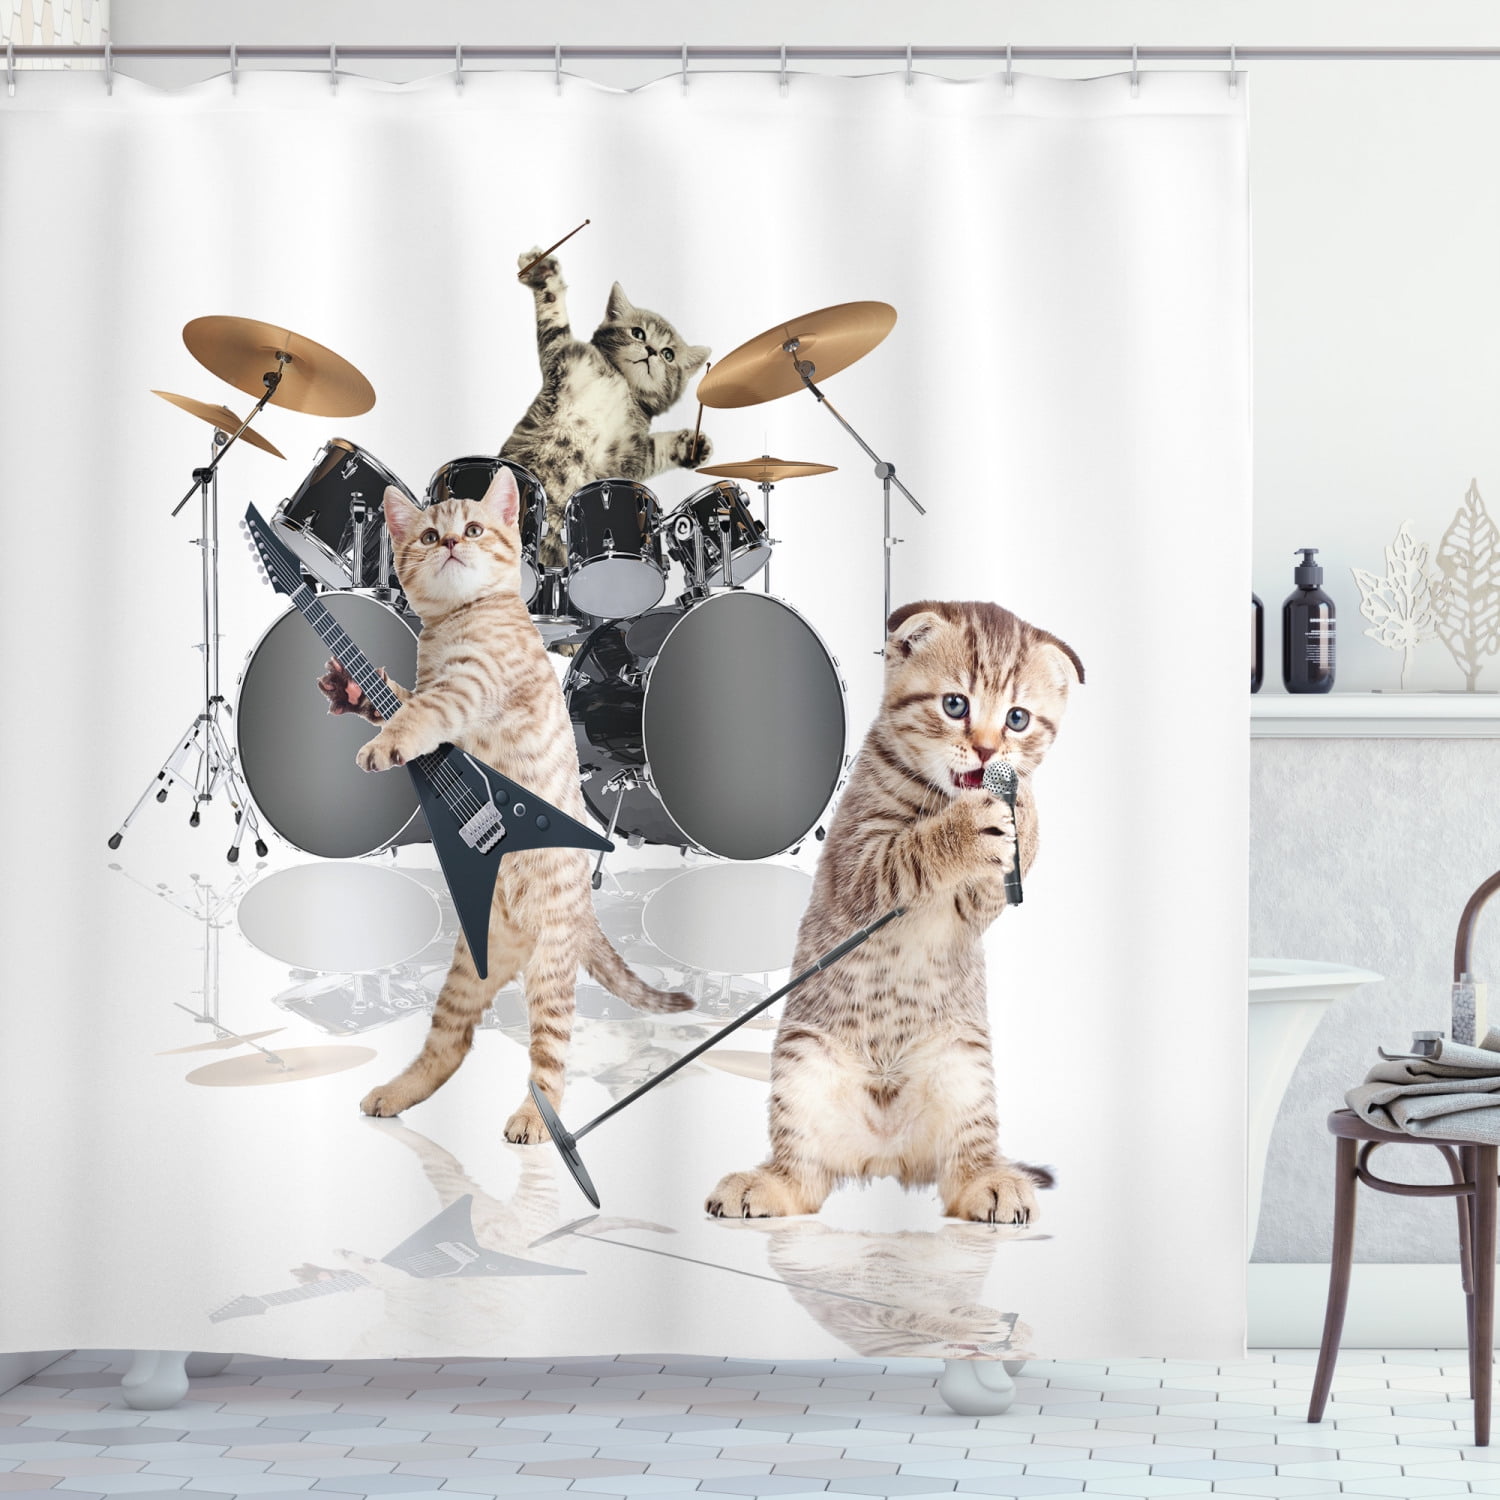 Cat looks at the tiger in the mirror Curtain Shower Home Bathroom Fabric 71x71in 